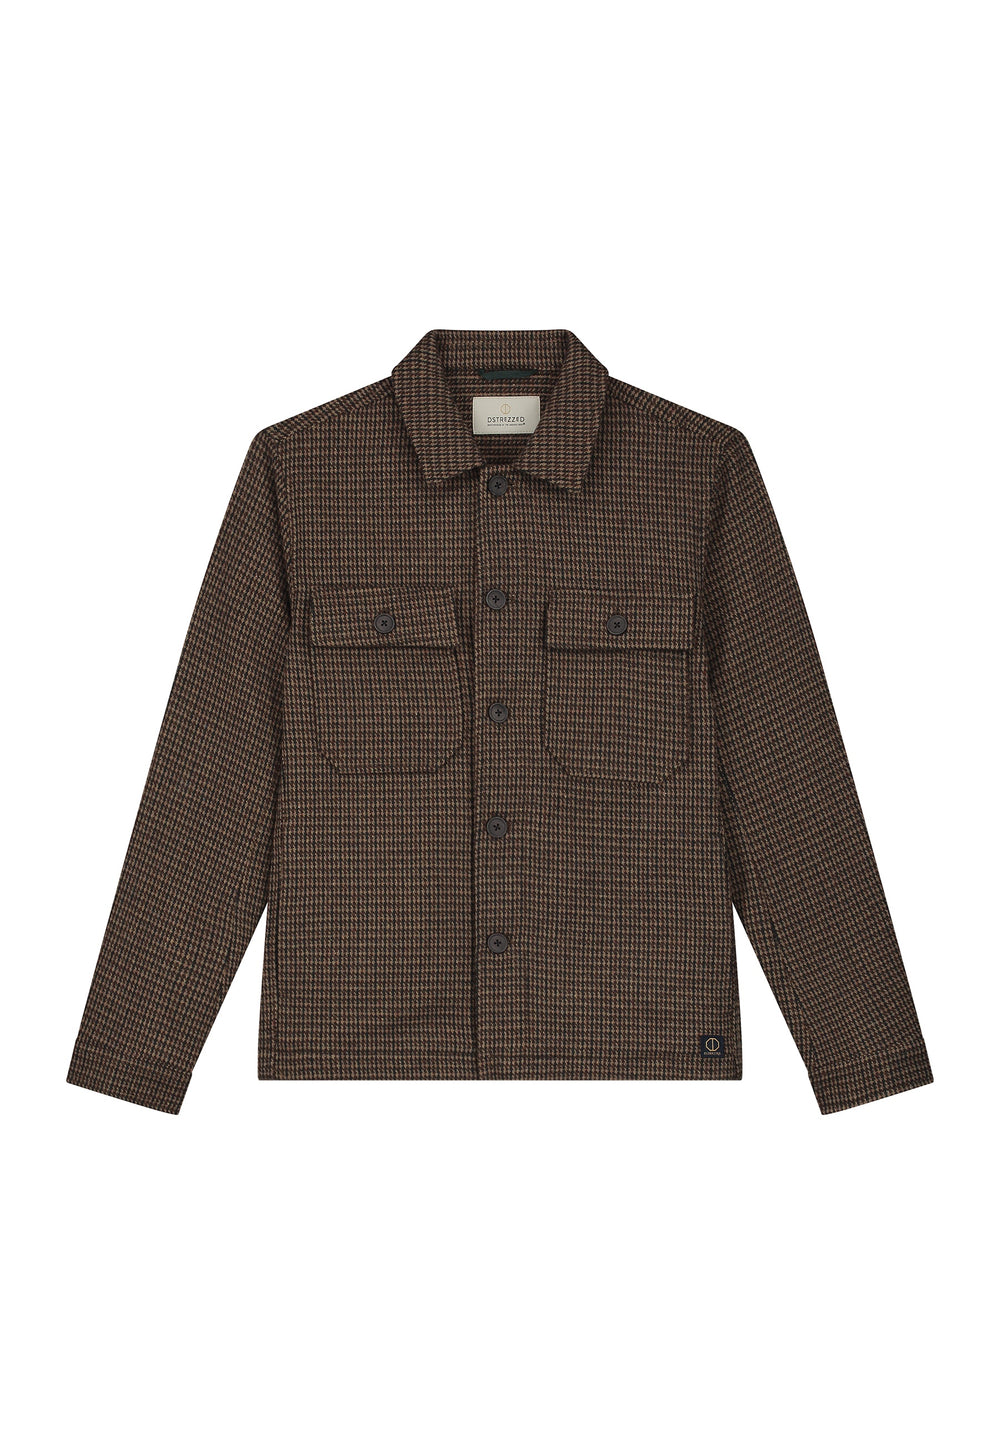 DSTREZZED - Tann Overshirt in Olive | Buster McGee